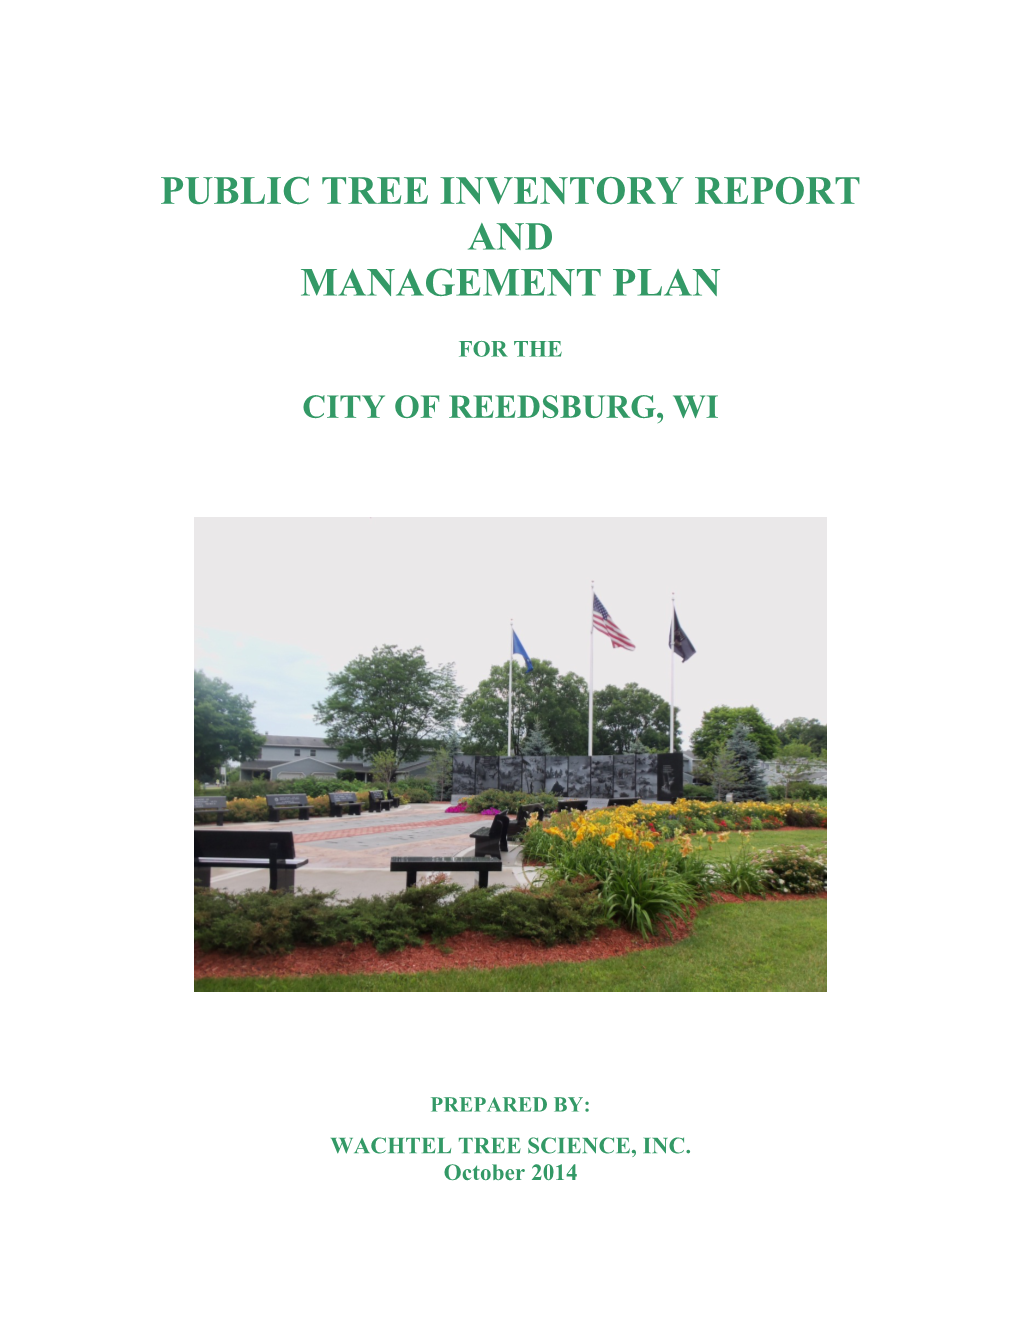 Public Tree Inventory Report and Management Plan